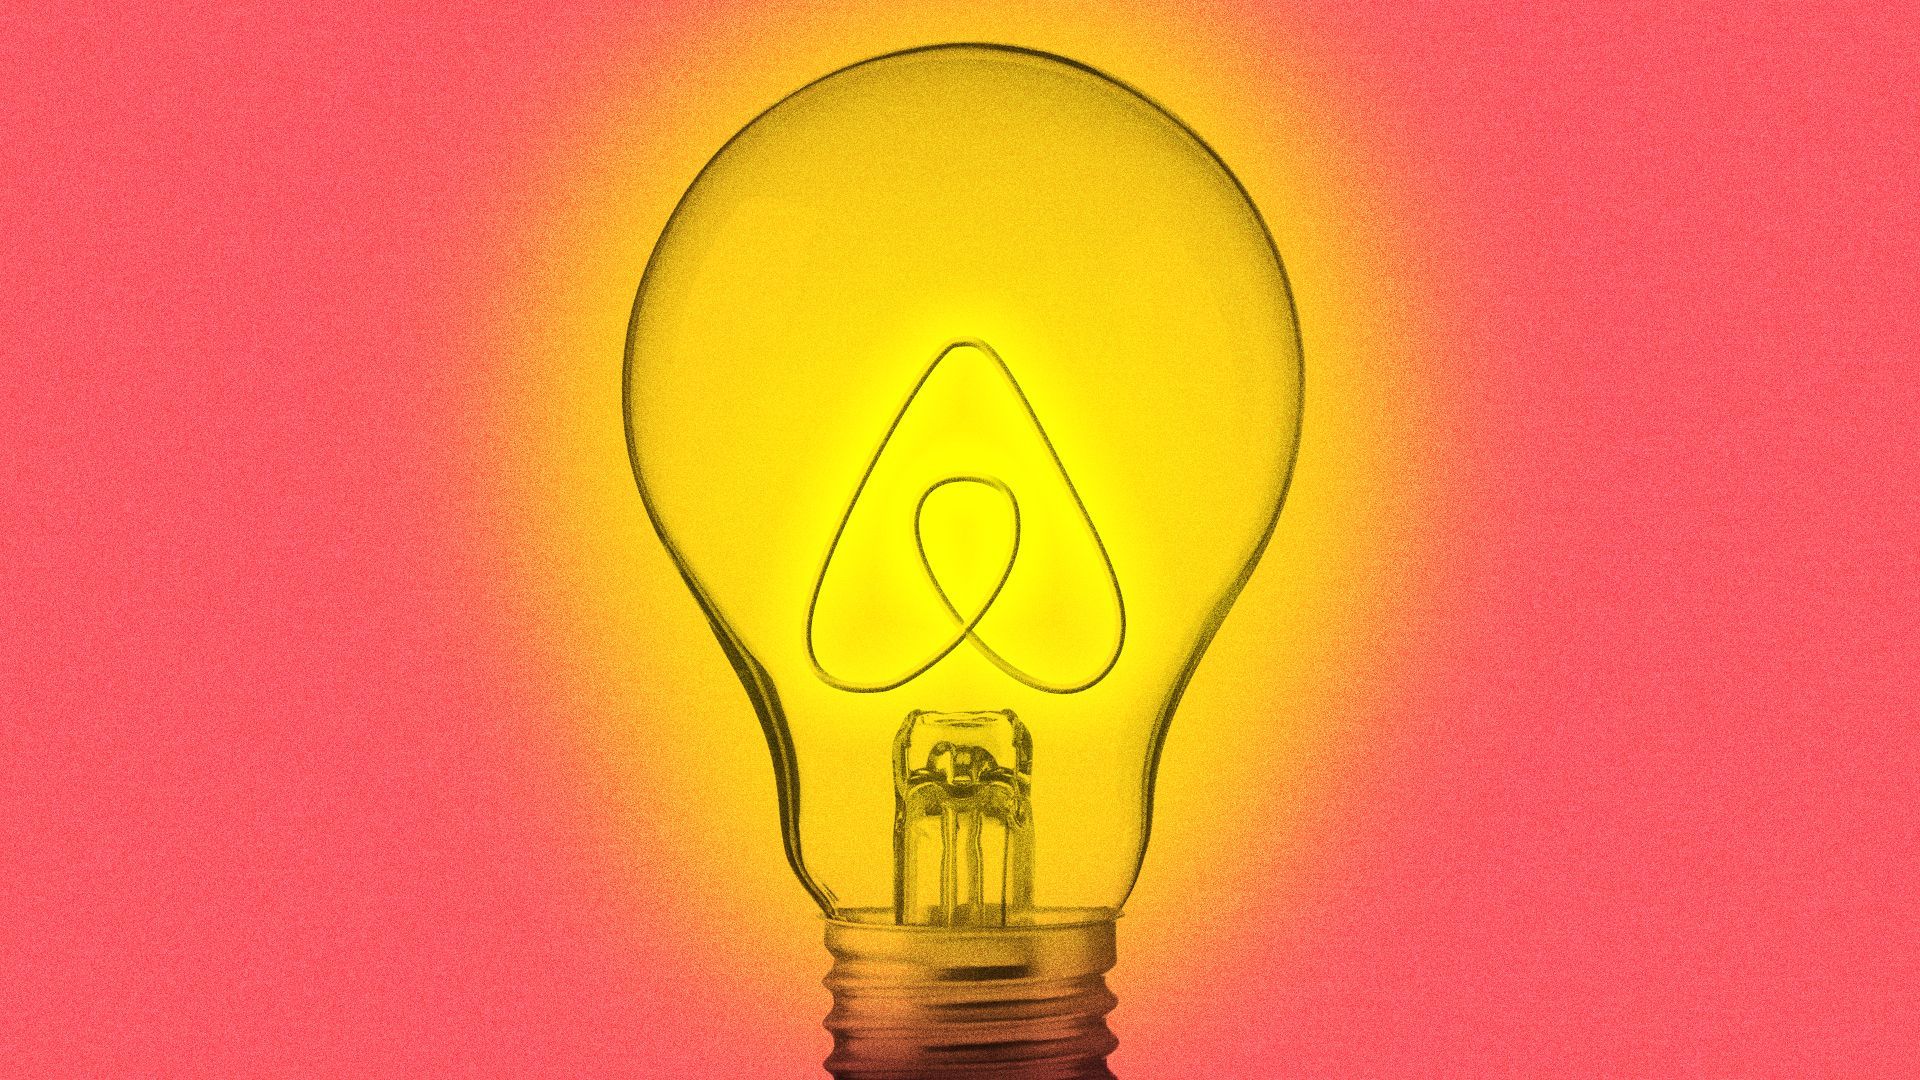 Illustration of a lightbulb with the filament in the shape of Airbnb's logo.